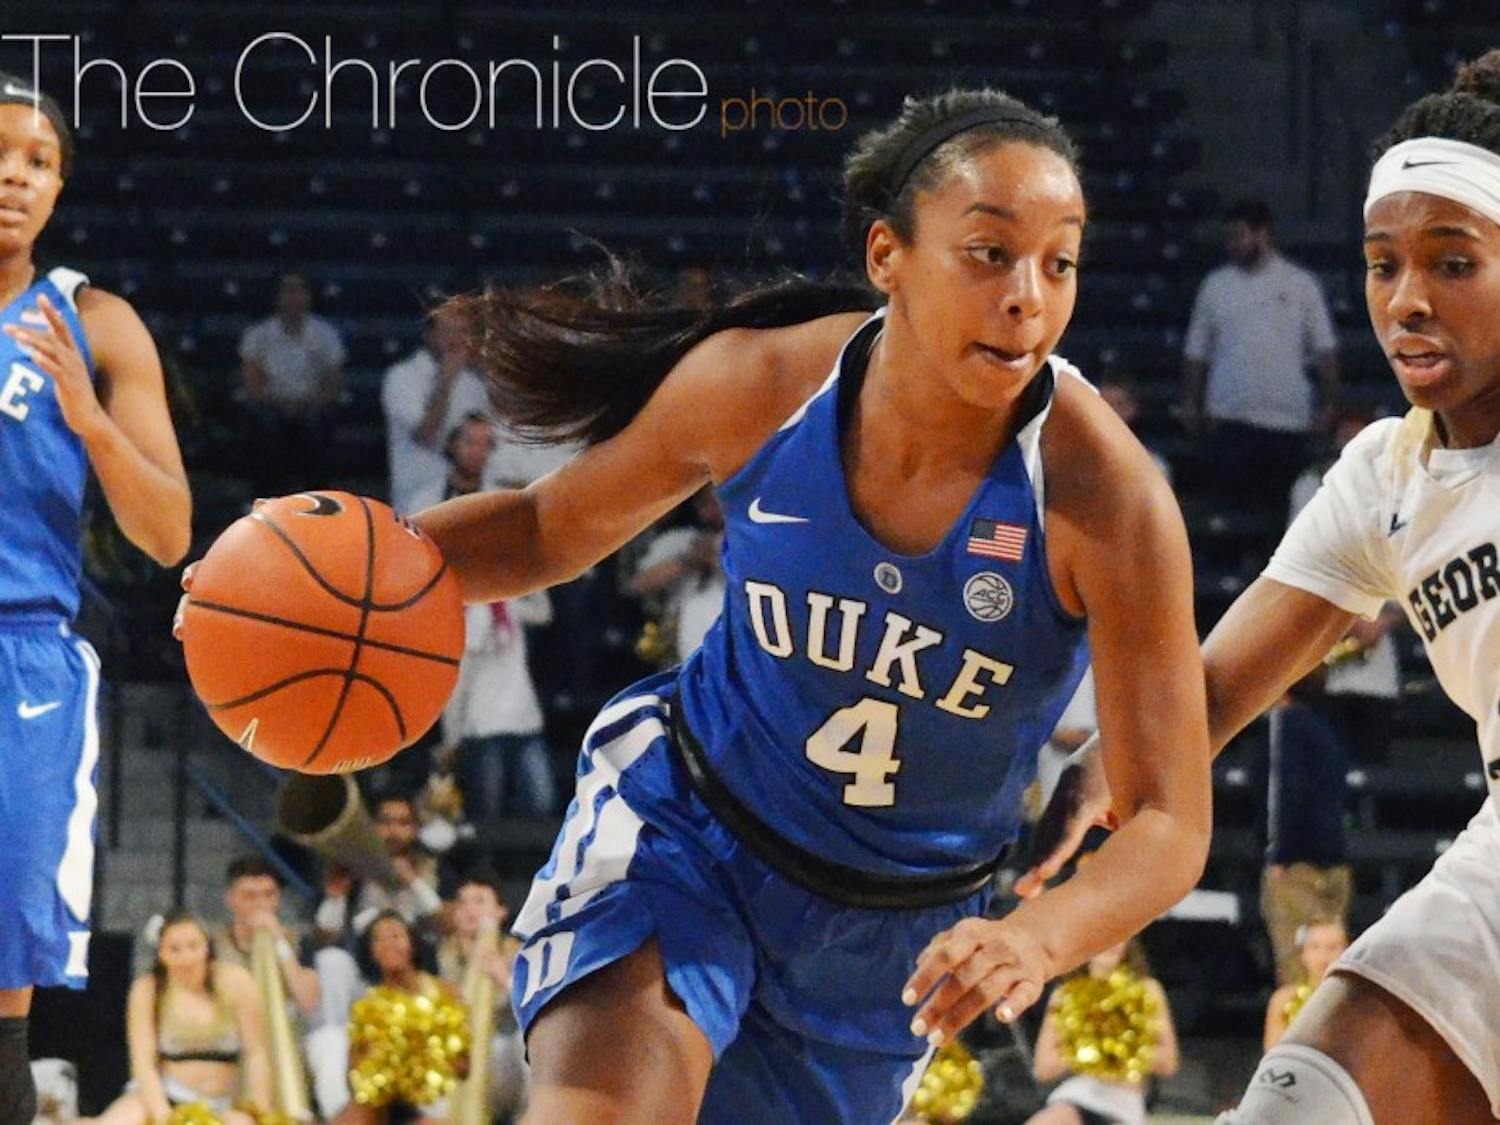 Lexie Brown kickstarted Duke's offense with 13 first-quarter points and finished with 25 to lead all scorers.